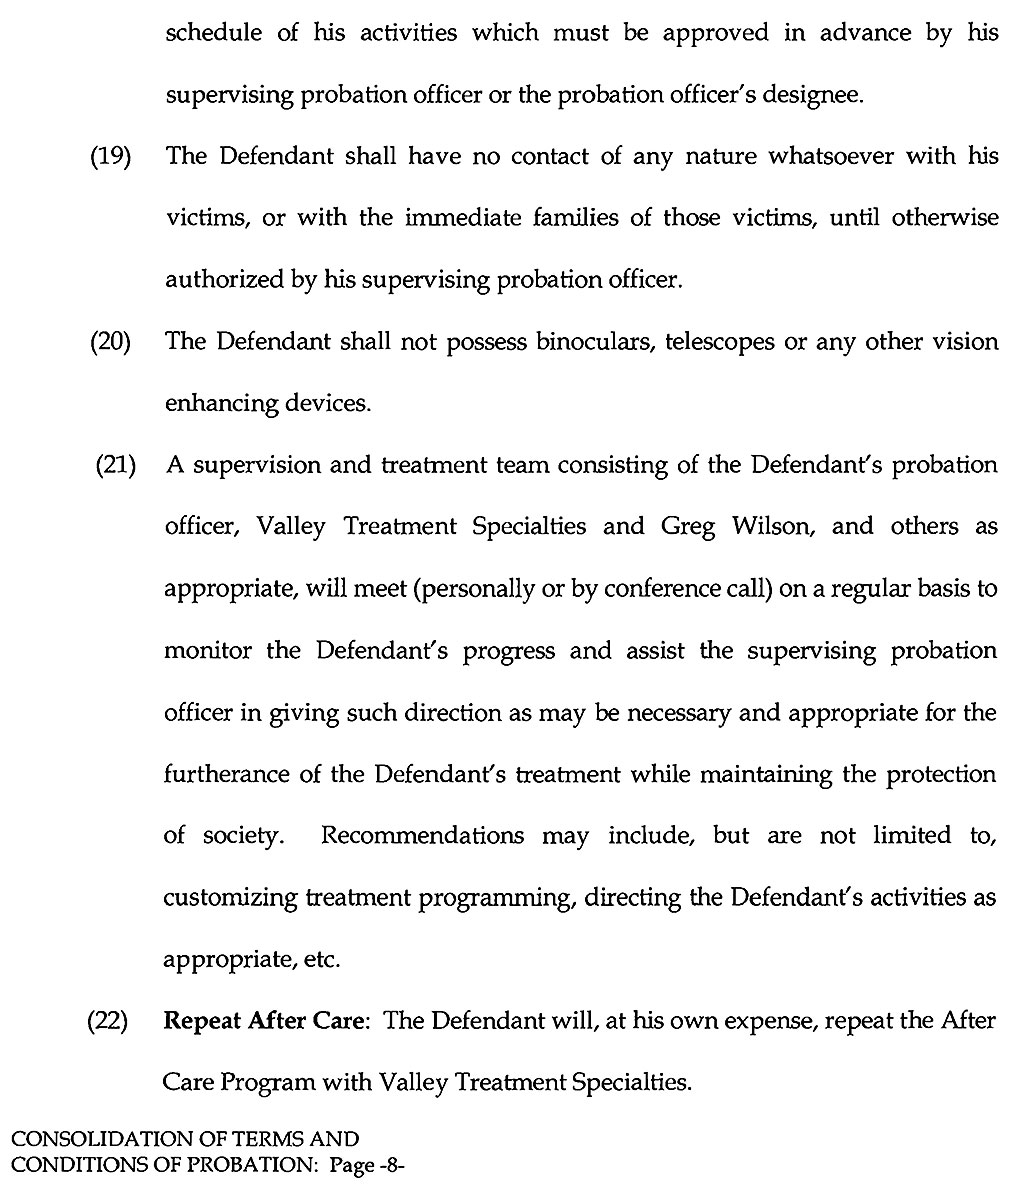 Consolidation of Terms and Conditions of Probation page 8